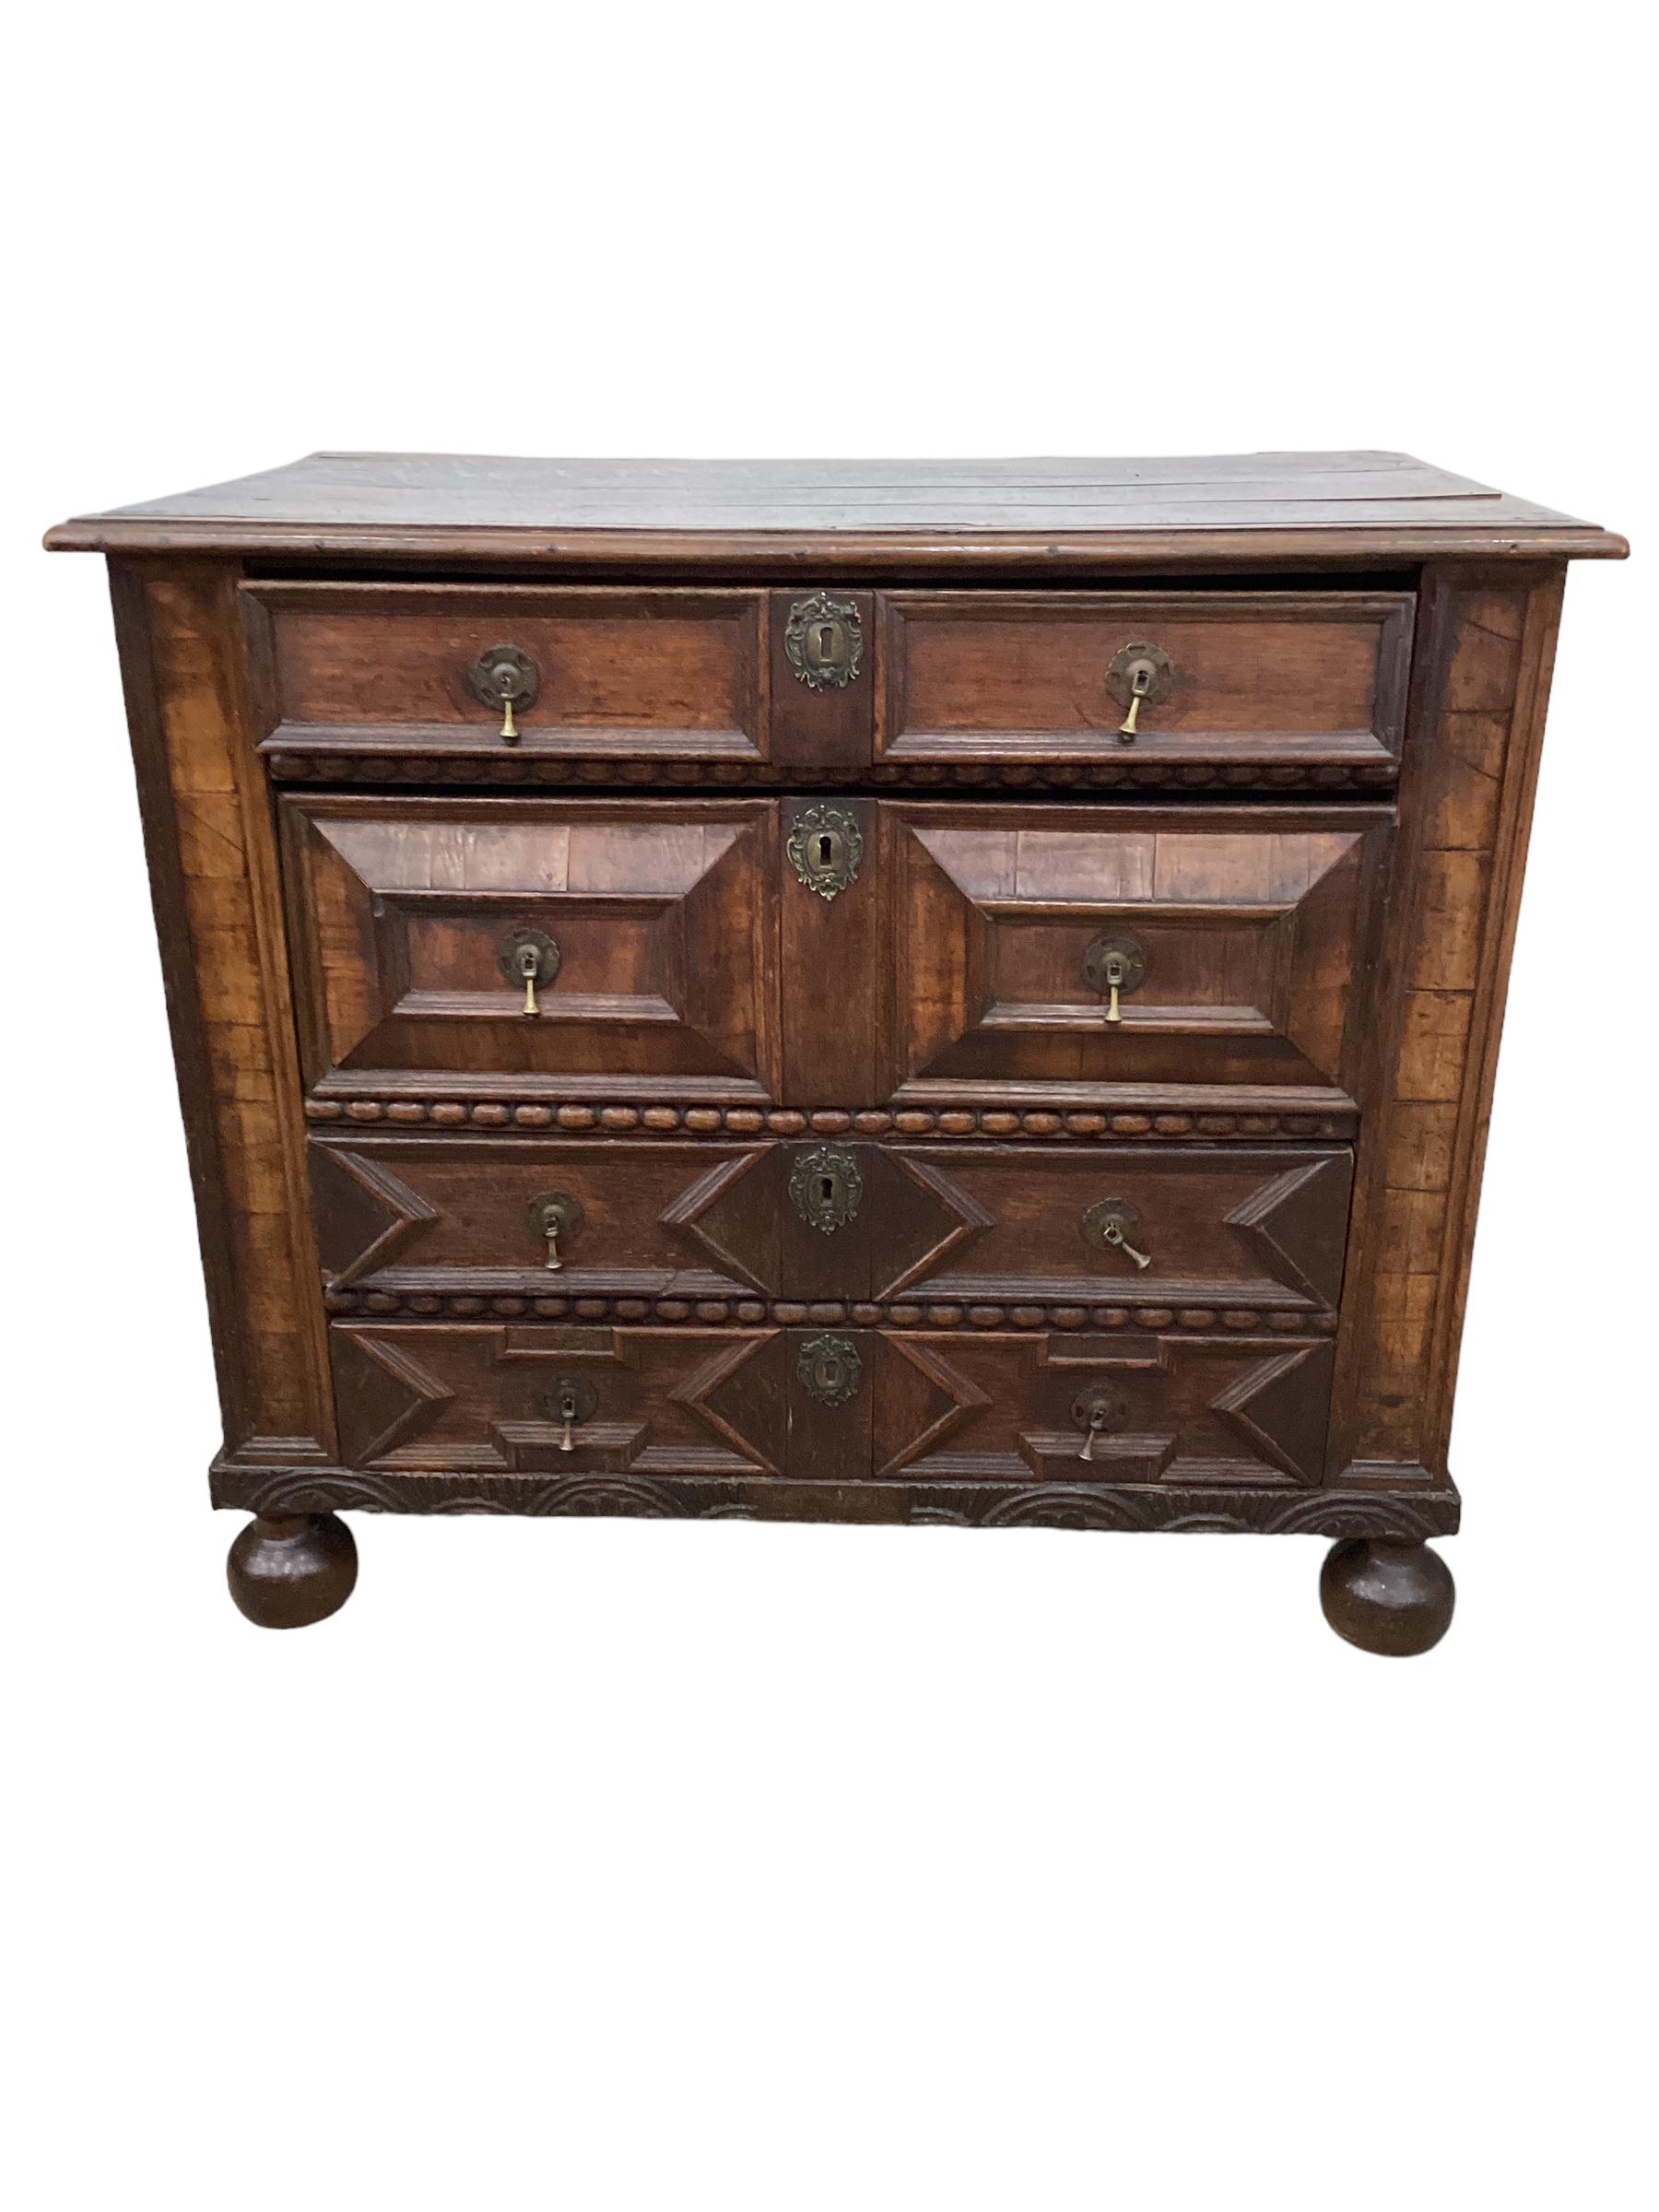 An 18th Century William and Mary Oak Chest. Especially desirable size and proportion. This chest features the classic straight lines and simple geometric shapes that is characteristic of this time period, a sharp contrast of earlier baroque styles.